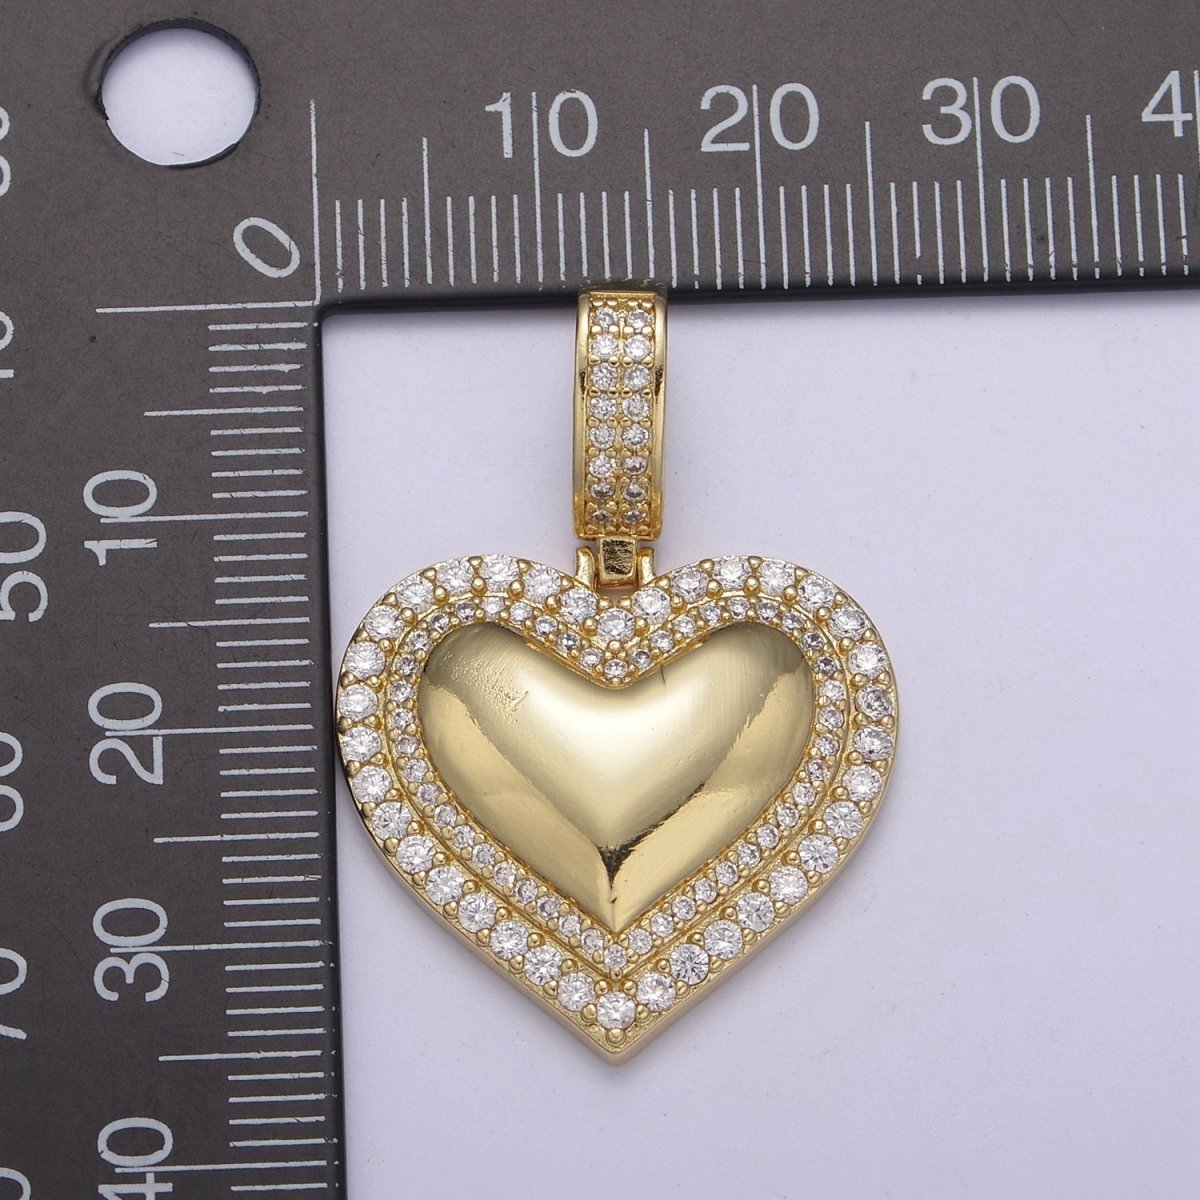 Dainty Cubic Zirconia Gold Filled Heart Charm Pendant H-328 - DLUXCA